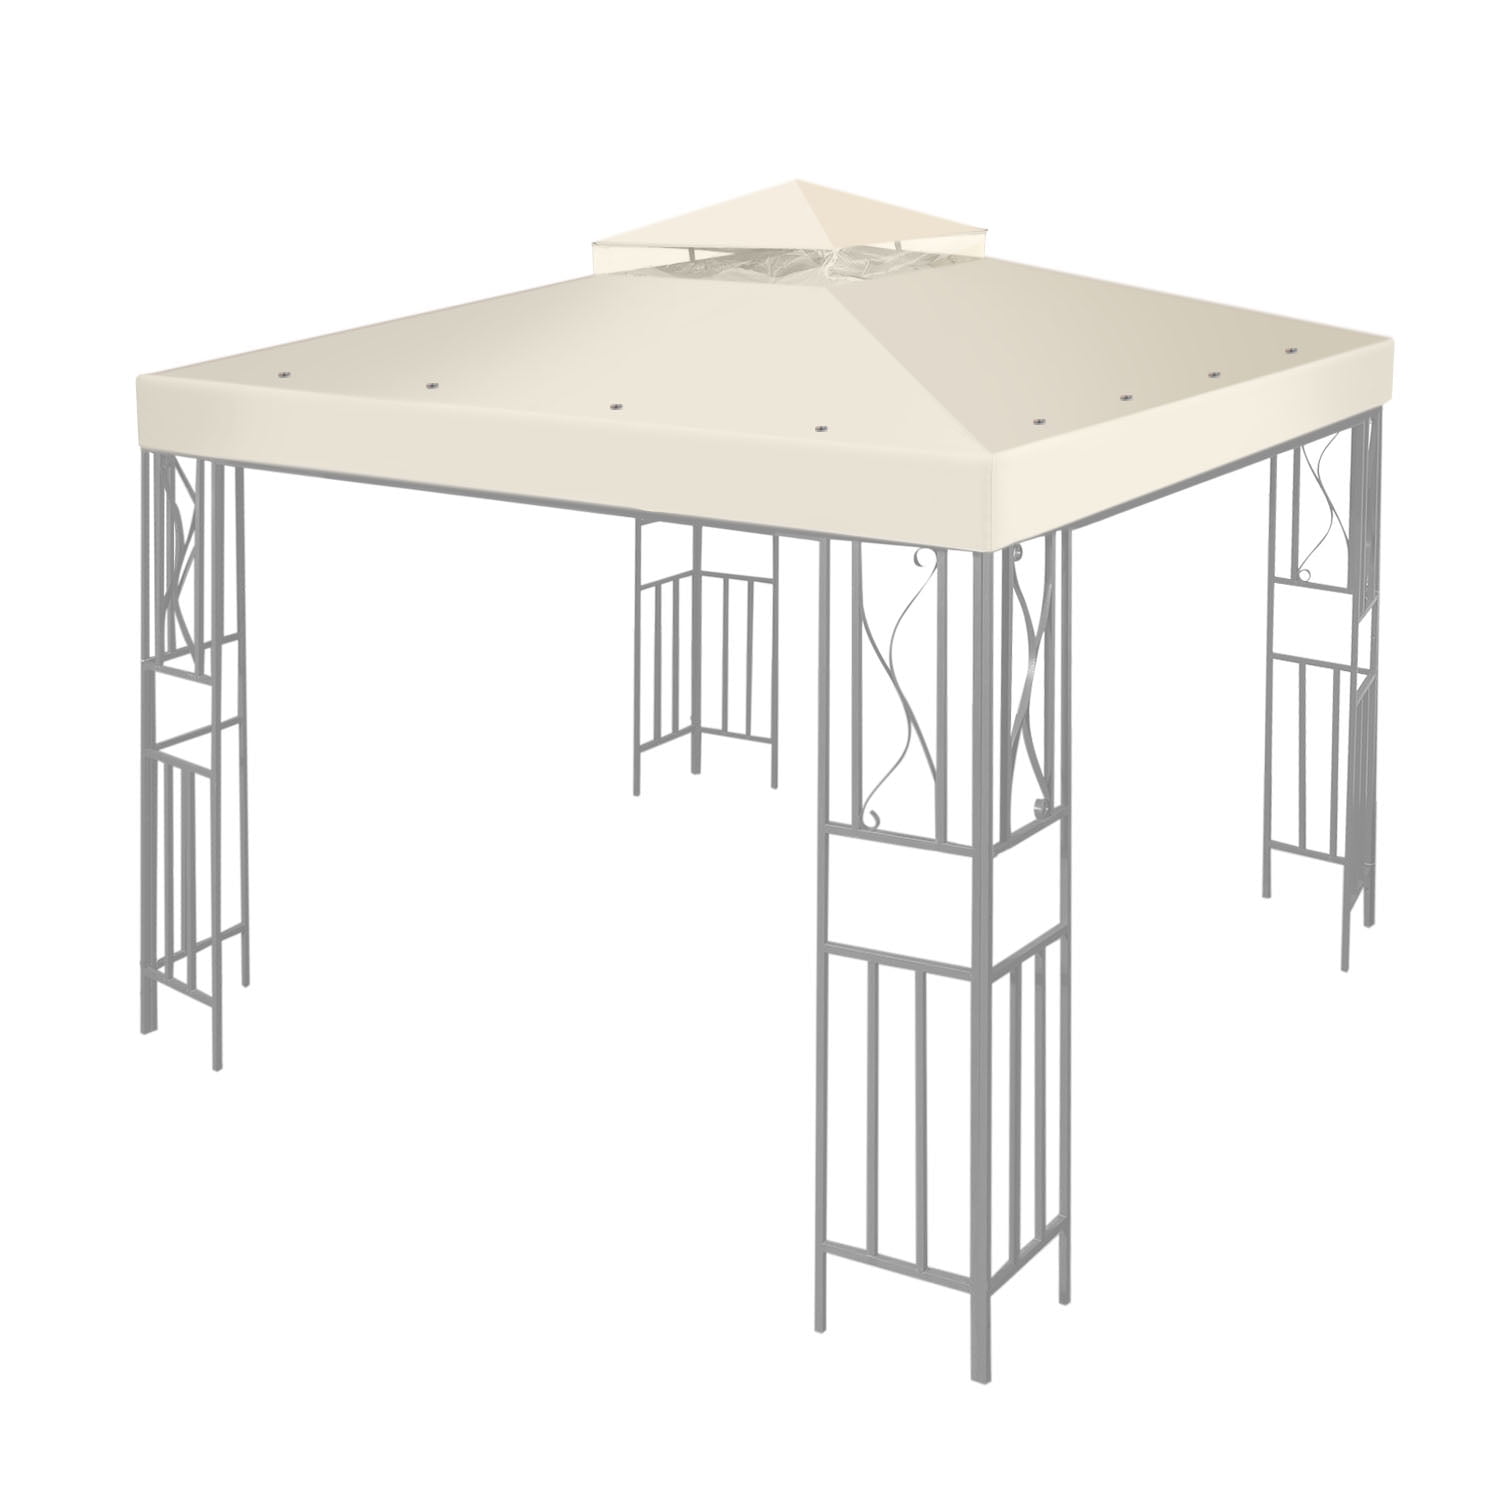 12 x 12 Feet Gazebo Canopy Top Replacement Cover (Ivory) Dual Tier Up Tent Accessory with